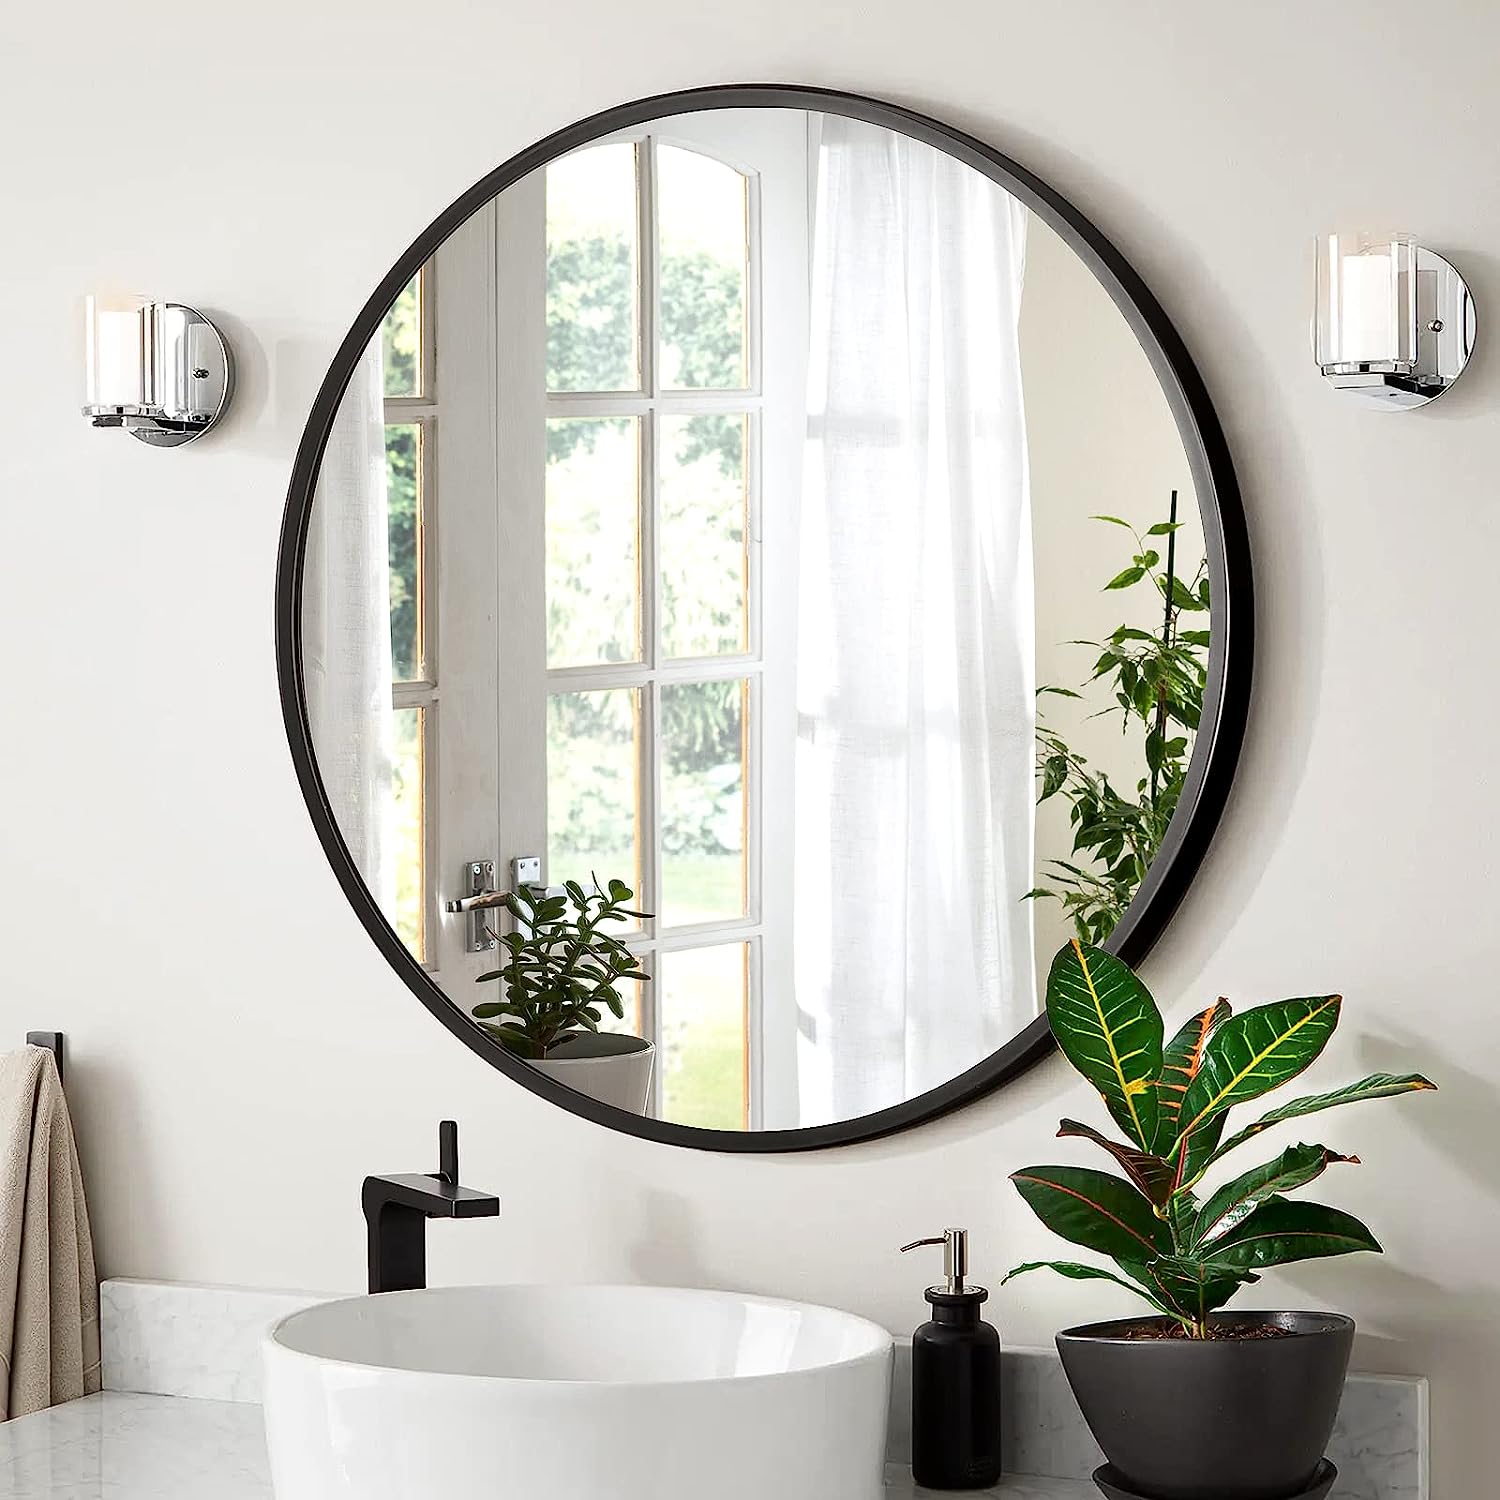 A.T.Lums 24 Inch Black Round Mirror, Wall Mounted [...]